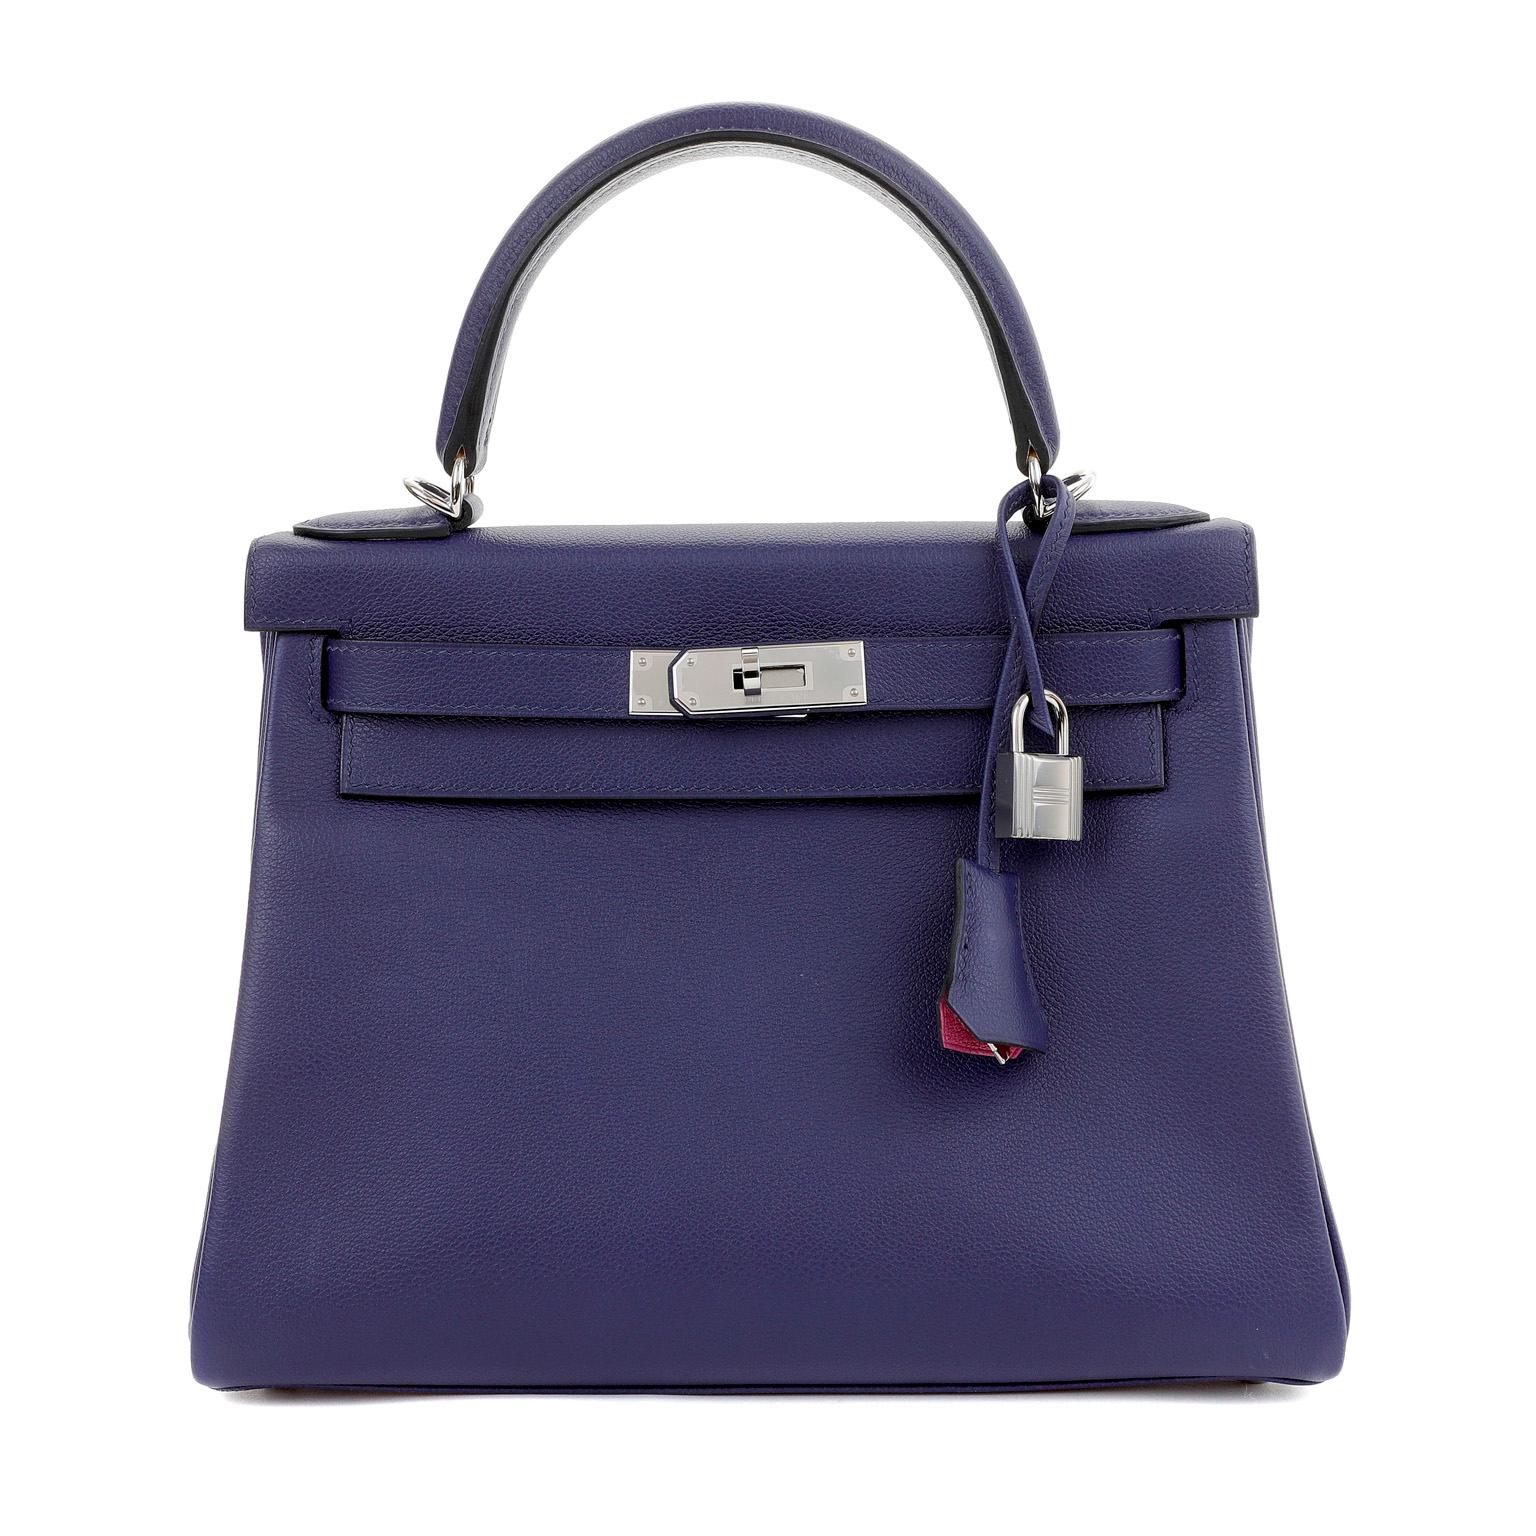 This authentic Hermès Midnight Blue Epsom 28 cm Kelly Sellier is in pristine unworn condition with the protective plastic intact on the hardware.  Hermès bags are considered the ultimate luxury item worldwide.  Each piece is handcrafted with